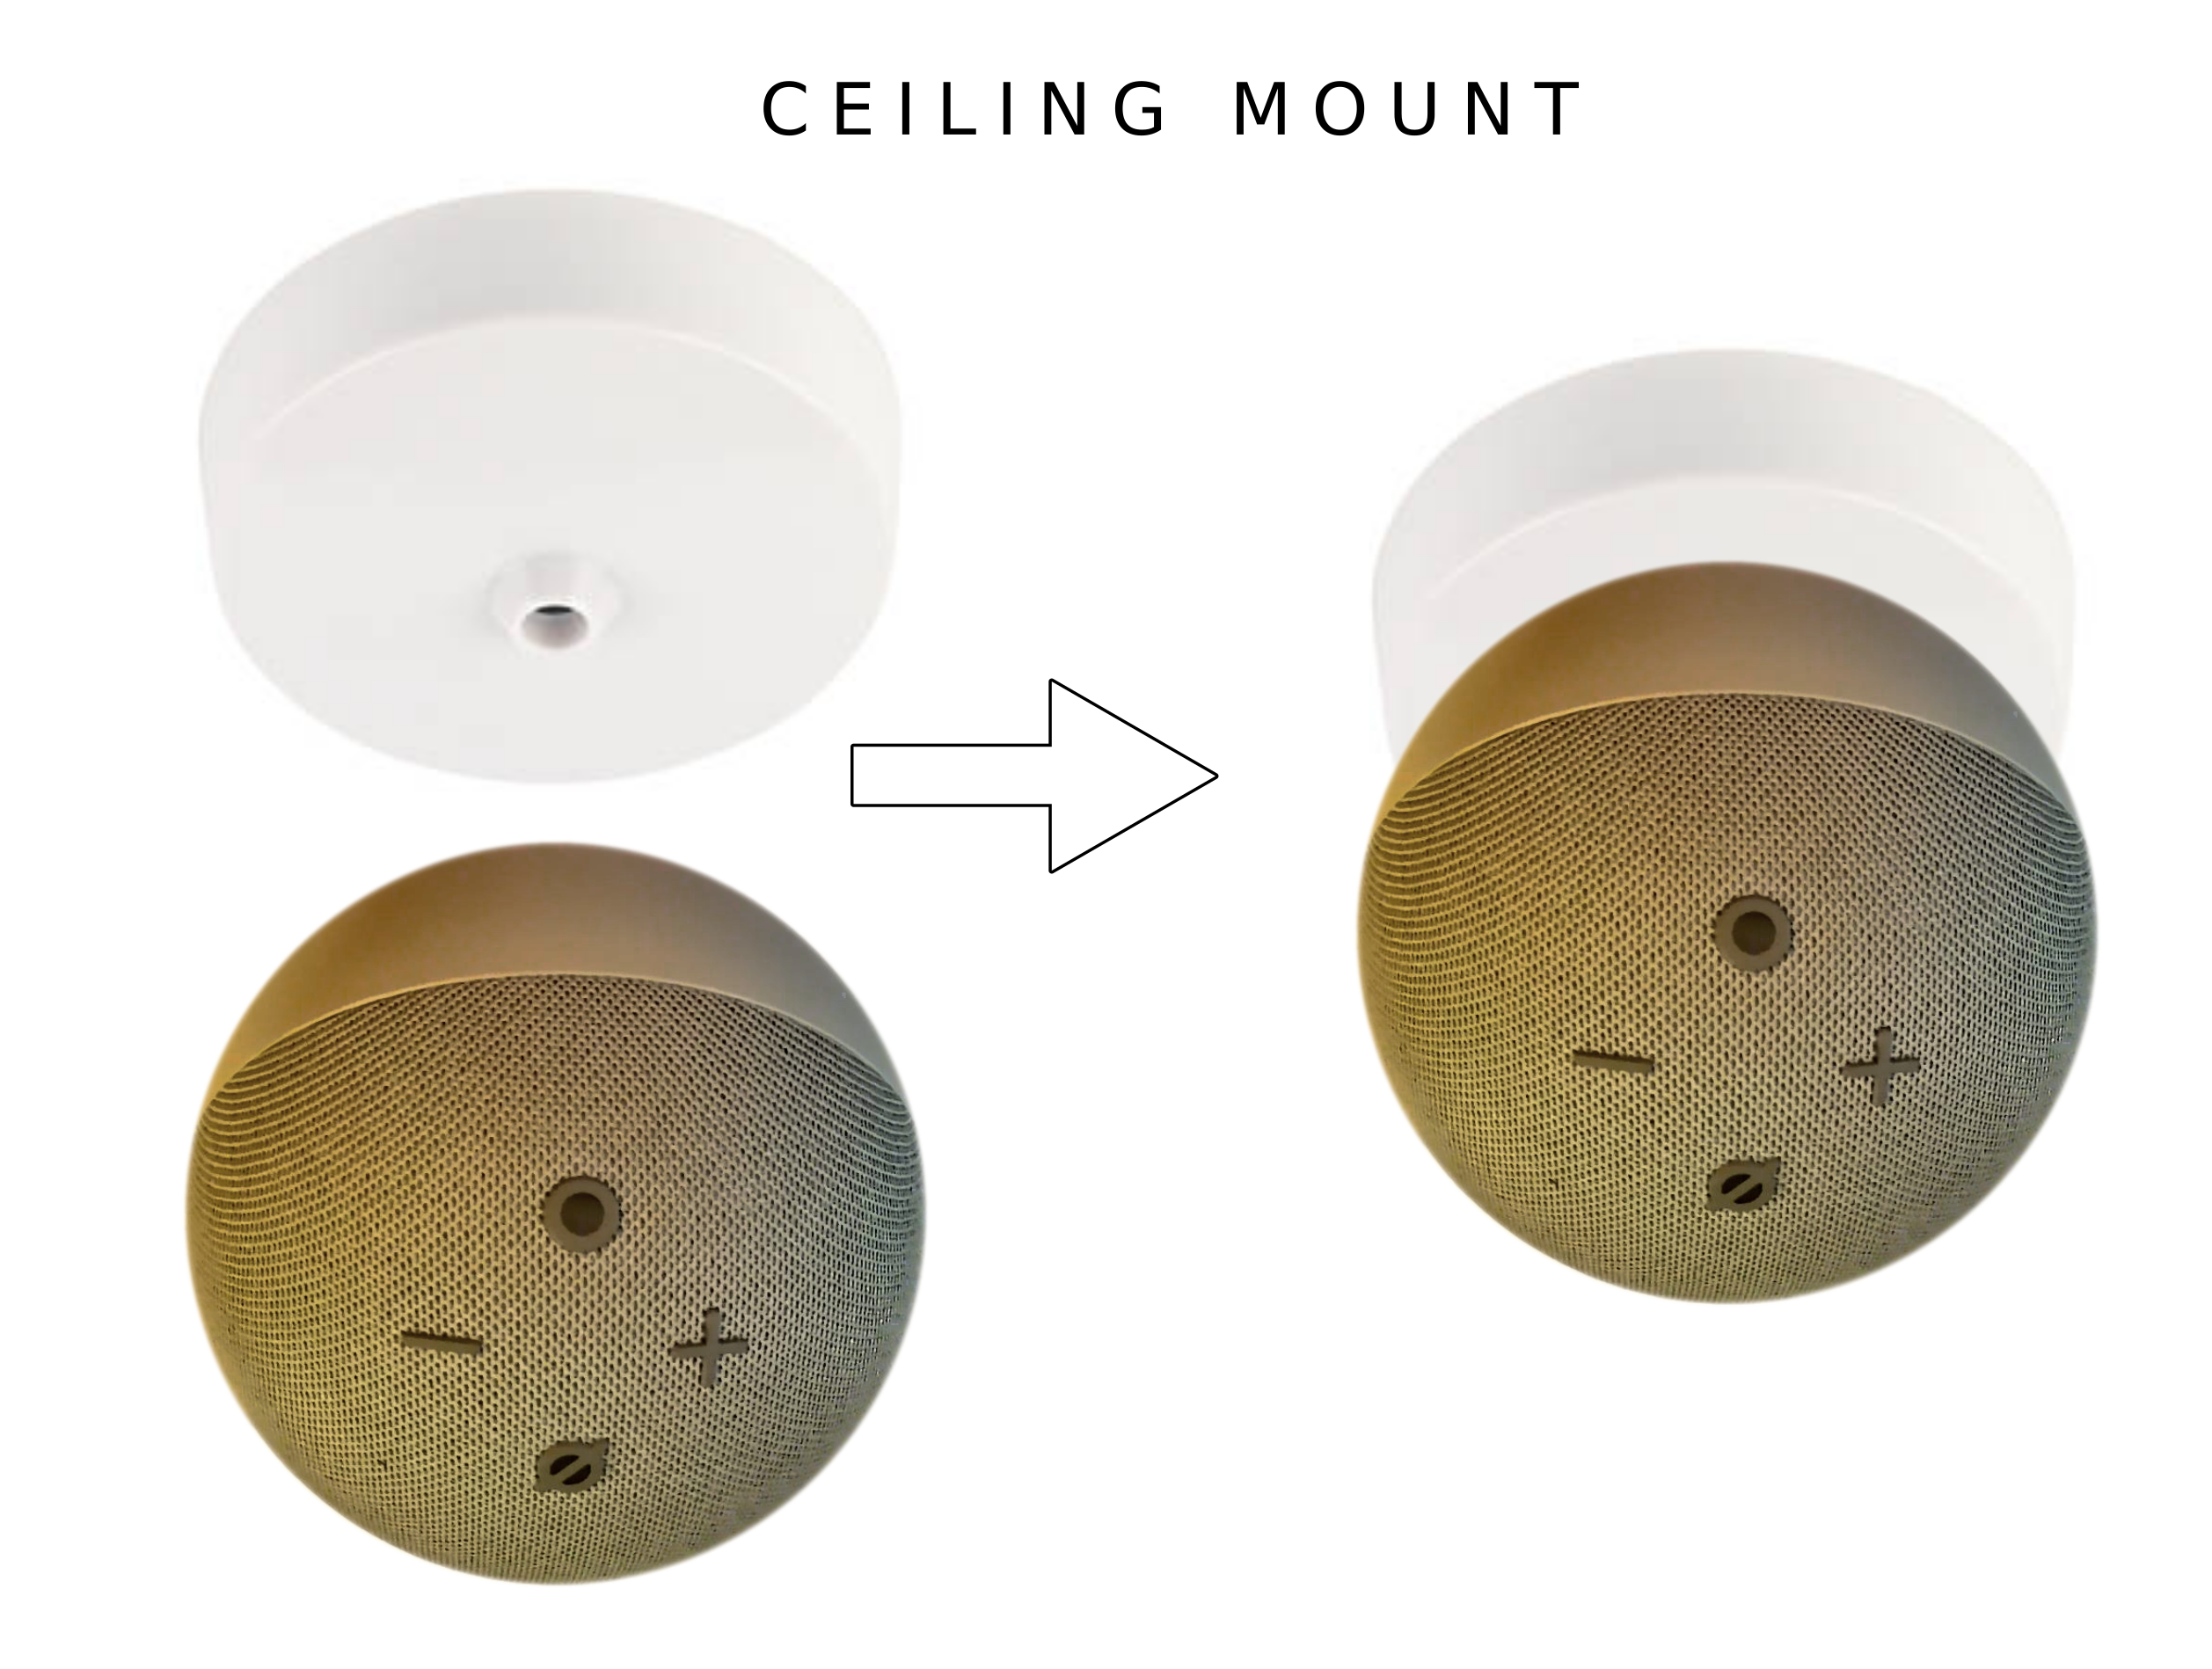 Ceiling Mount 1.png